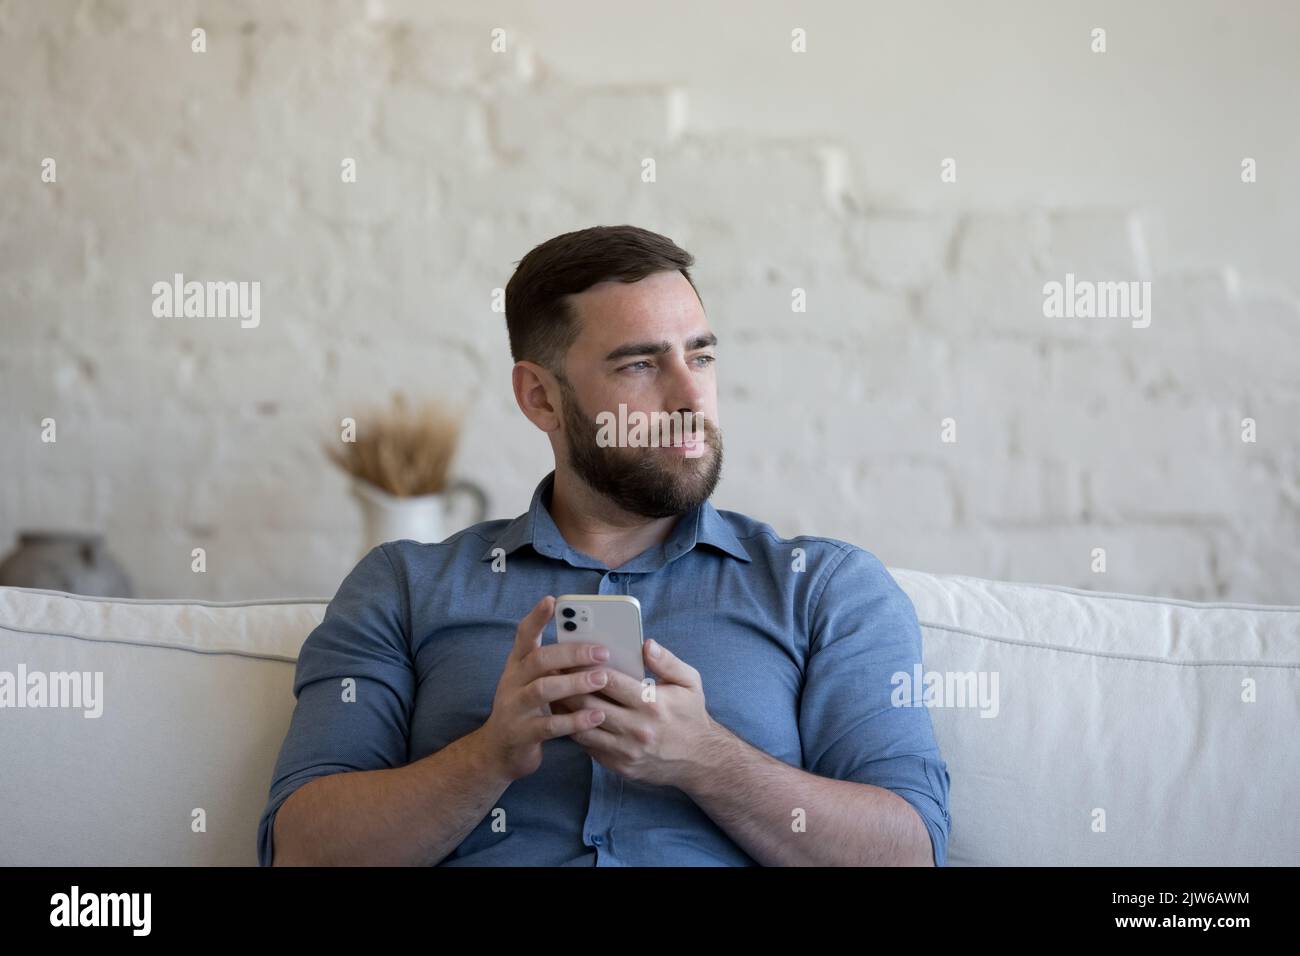 Pensive millennial man holds smartphone seated on sofa Stock Photo